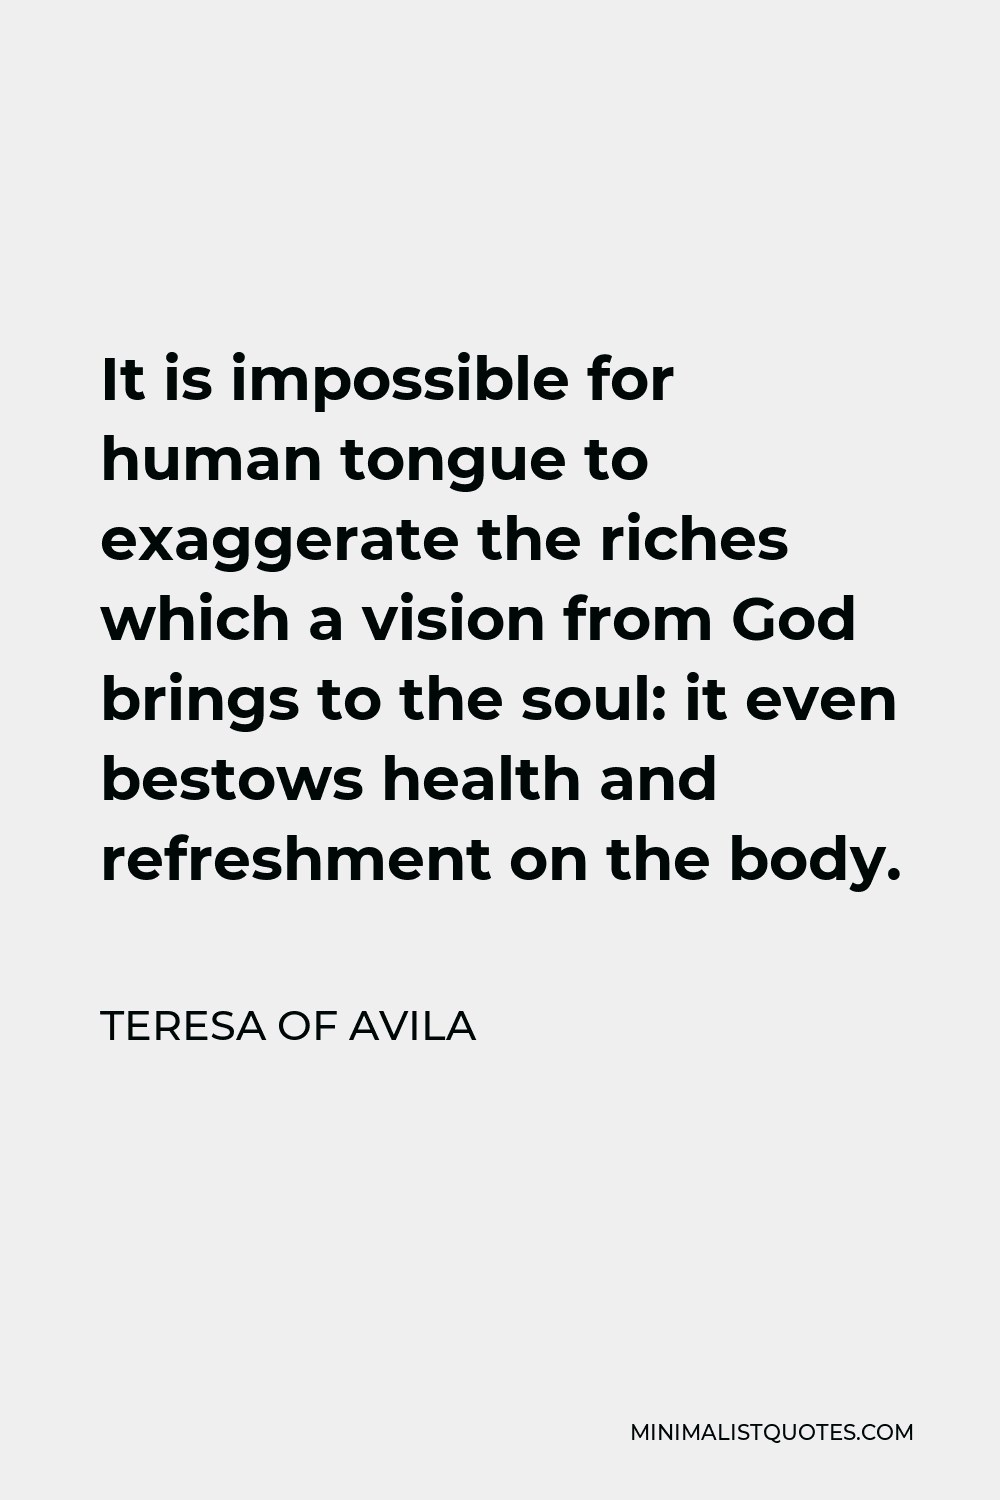 Teresa of Avila Quote - It is impossible for human tongue to exaggerate the riches which a vision from God brings to the soul: it even bestows health and refreshment on the body.